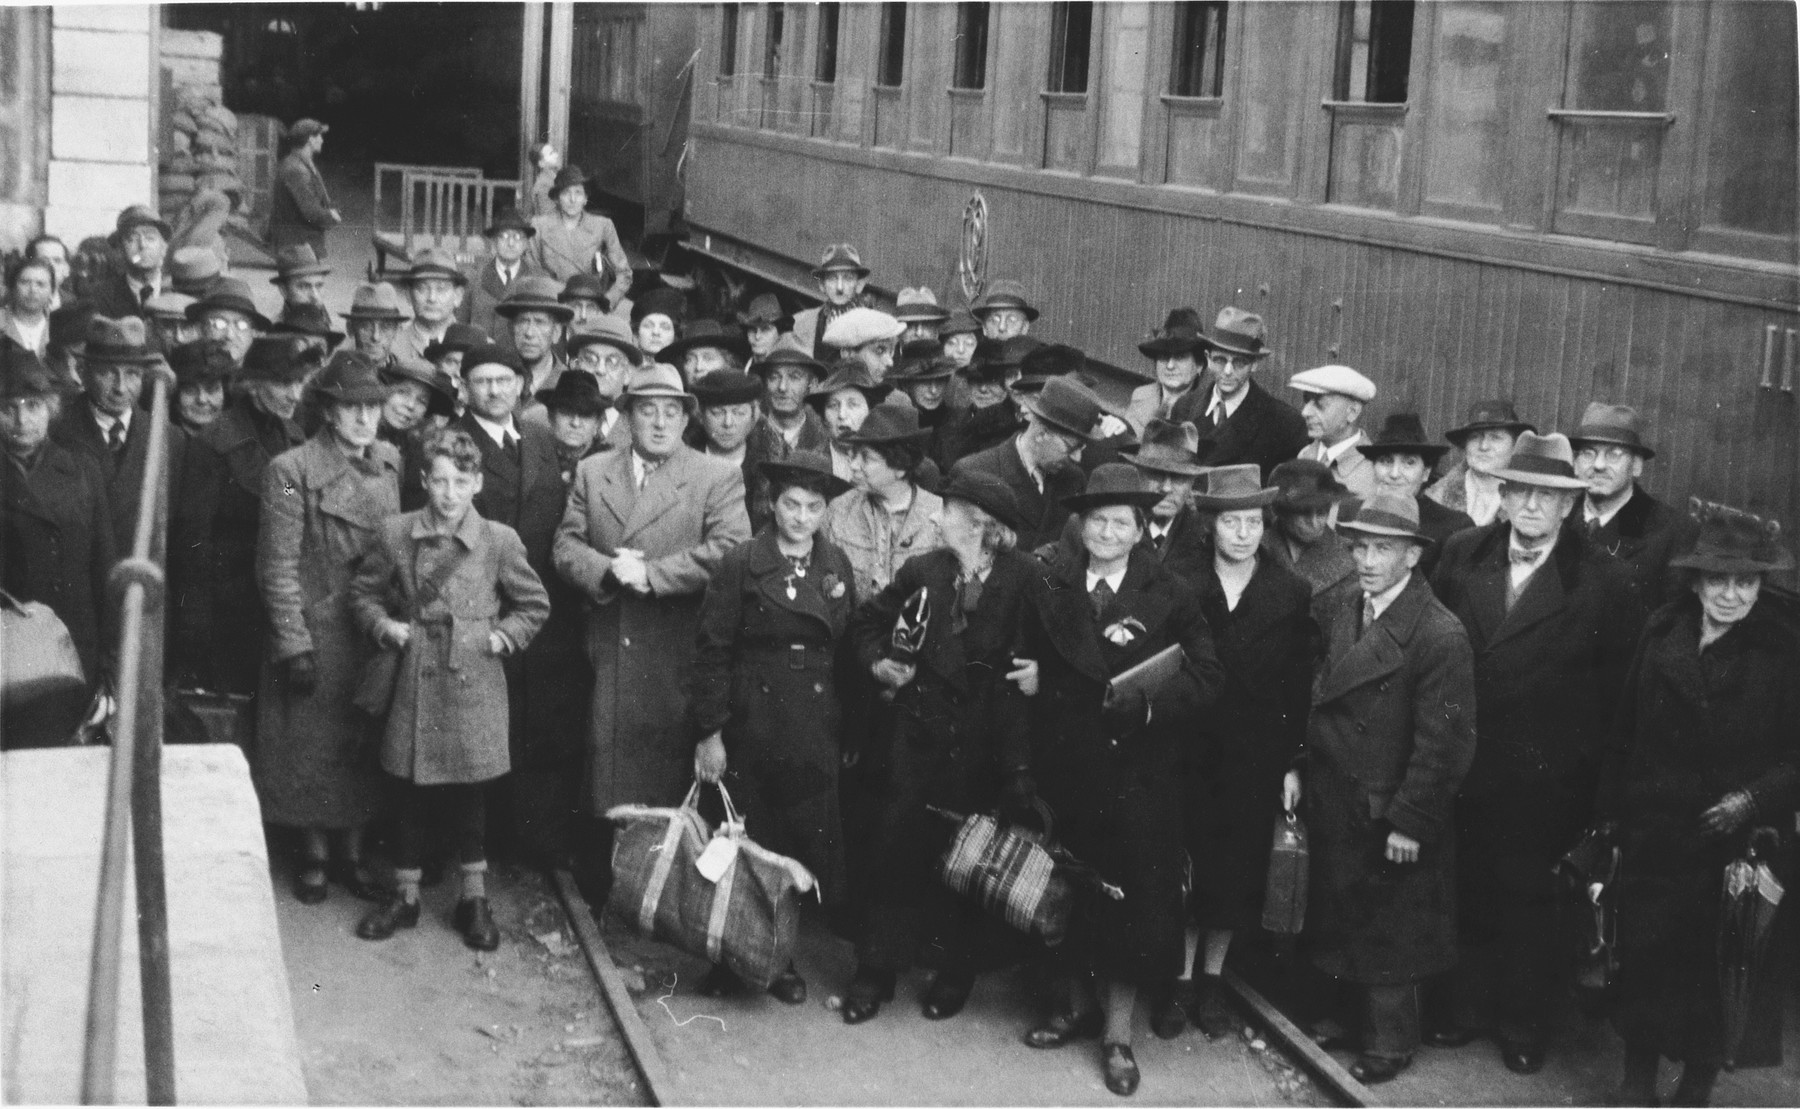 Group portrait of newly arrived Jewish refugees at the St. Appolonia train station in Lisbon.